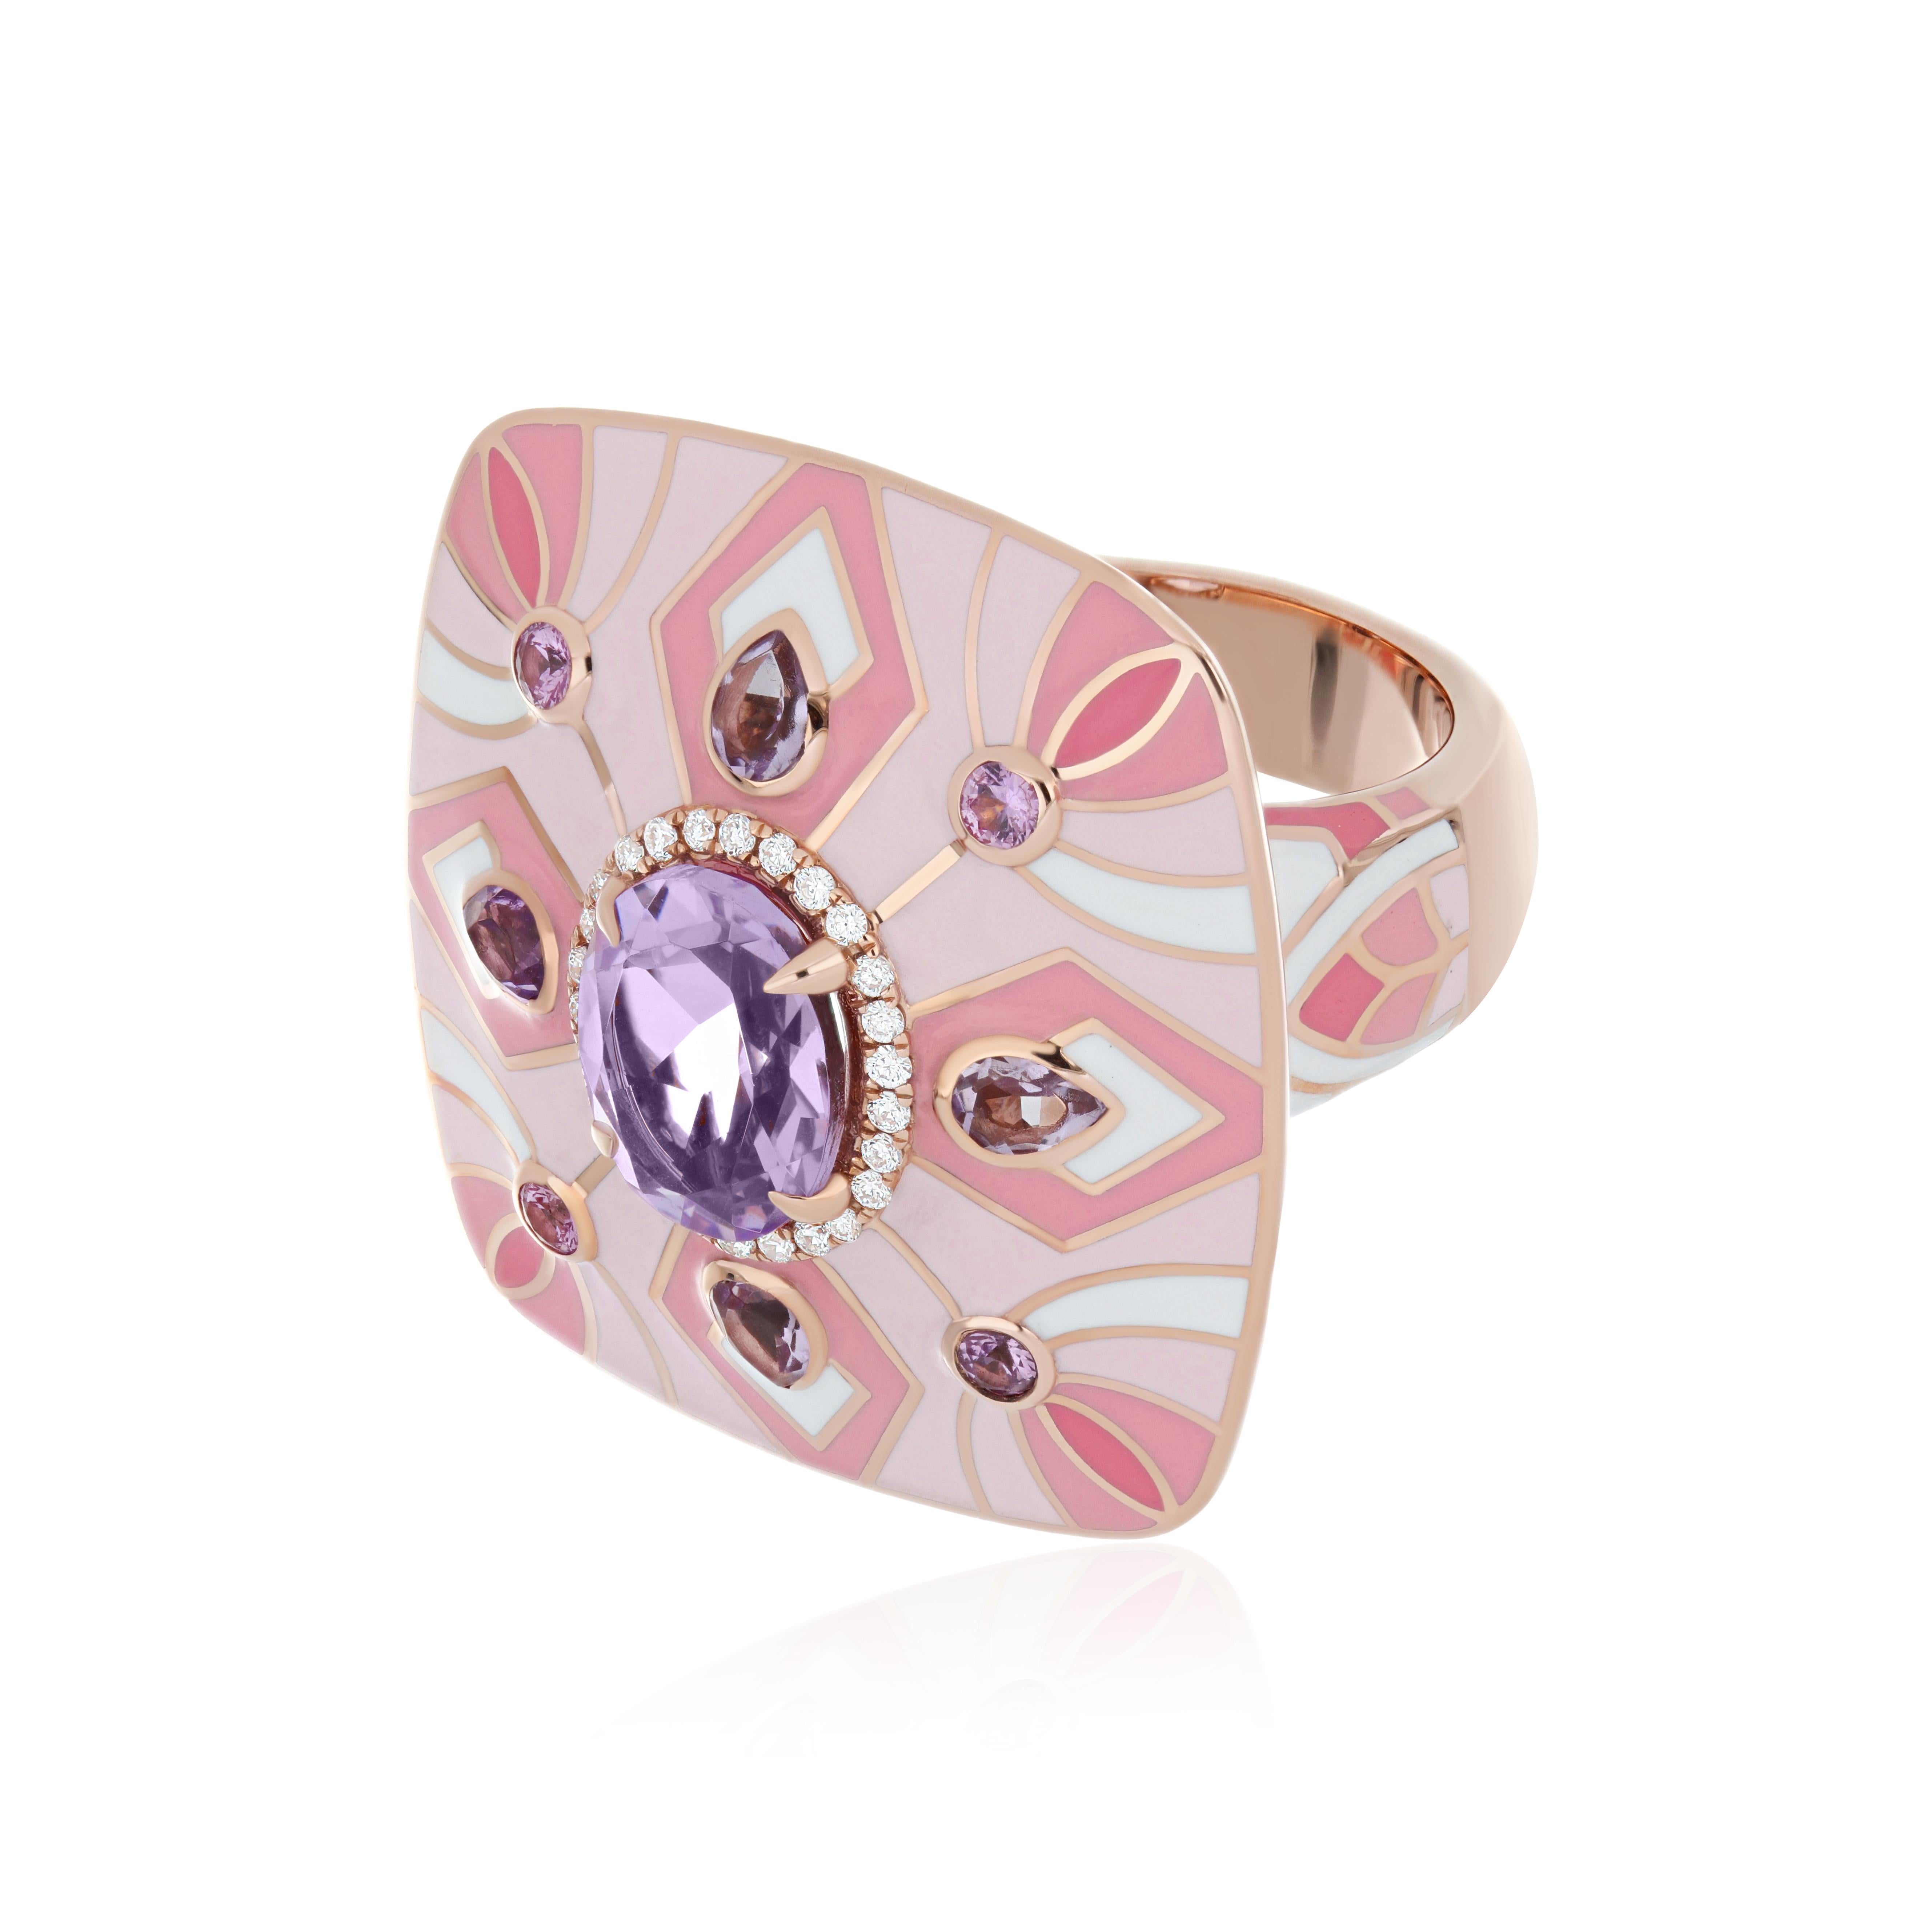 Elegant and Exquisitely detailed 14 karat Roes Gold Ring, with 2.85Cts (approx. total) Amethyst in beautiful bezel setting and Surrounded by Enamel, and Micro pave Diamonds, weighing approx. 0.15 CT's. (approx.) total carat weight to further enhance